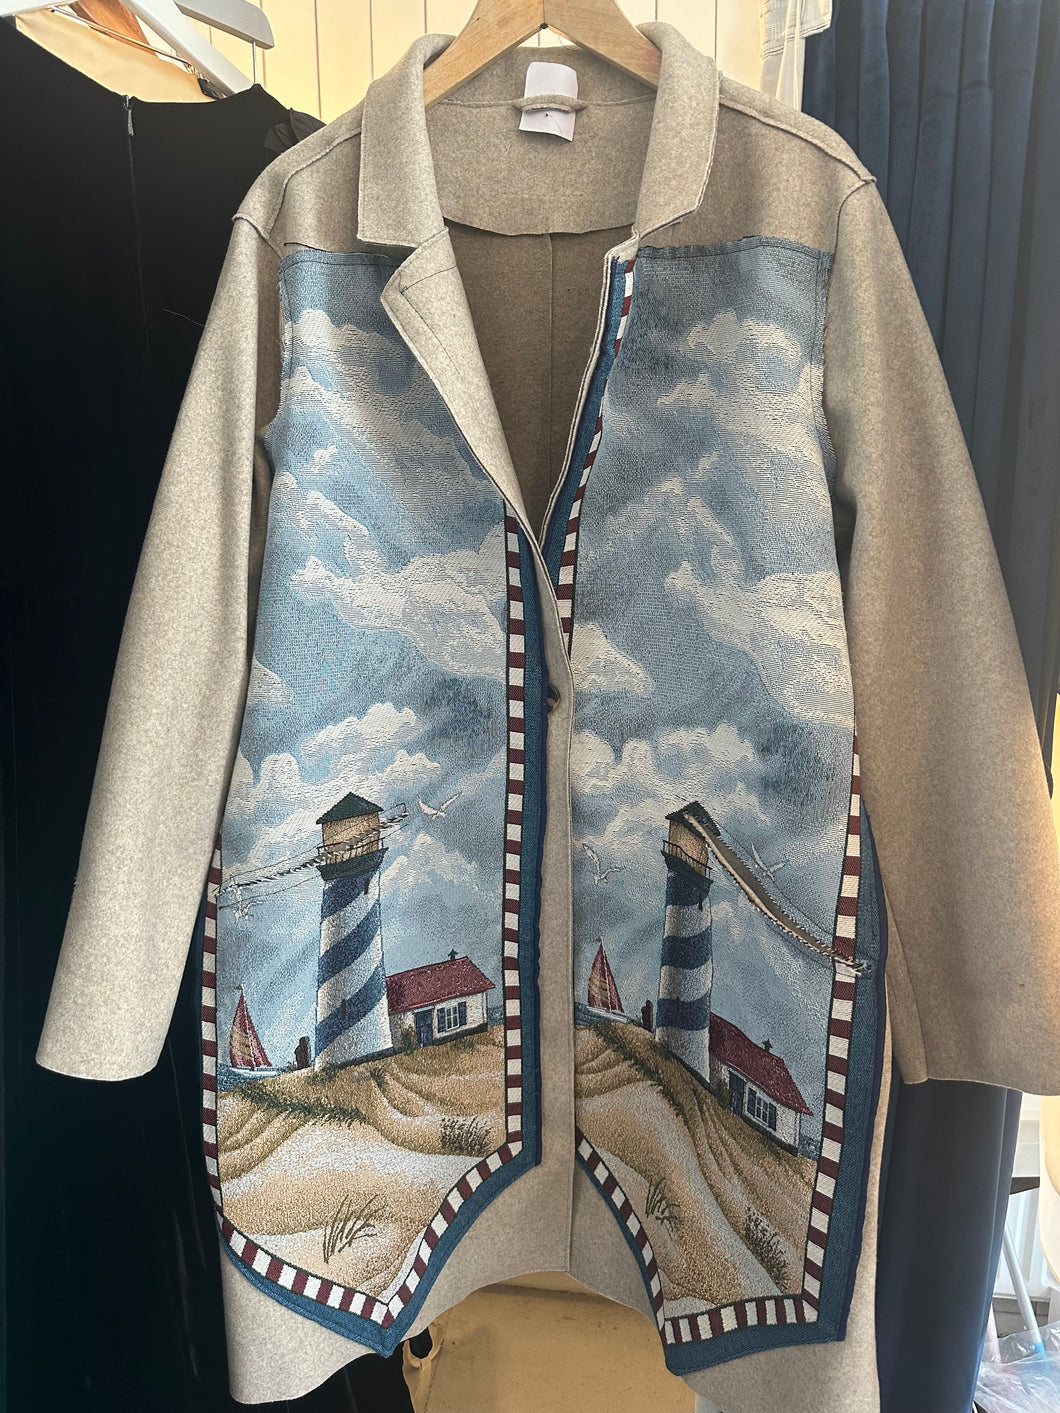 Grey felt coat with tapestry image front